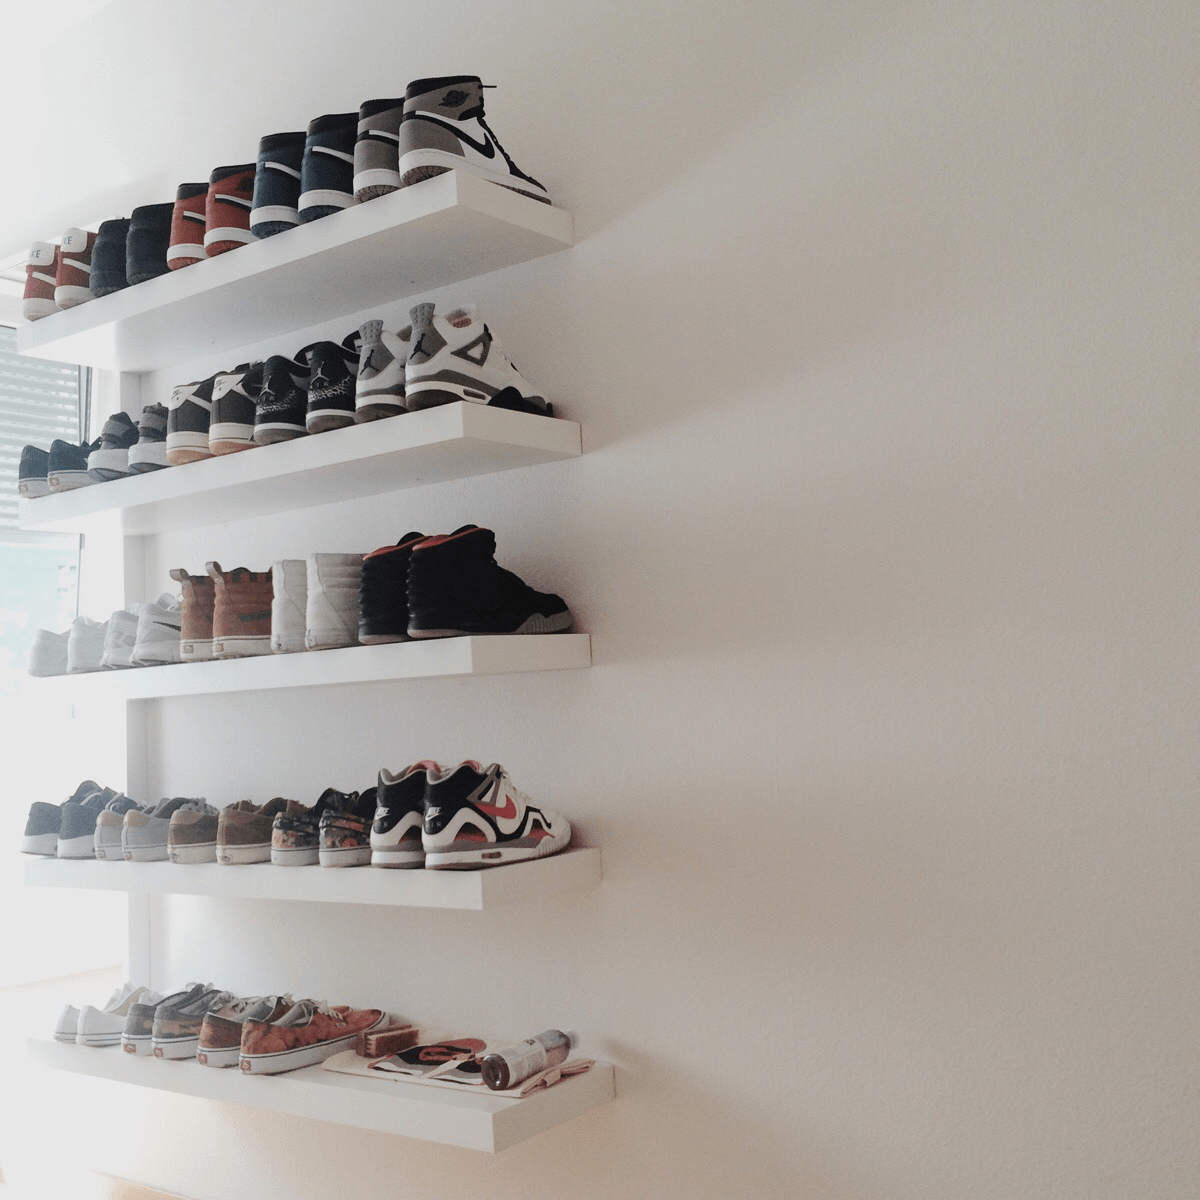 A collection of sneakers (reddit.com)